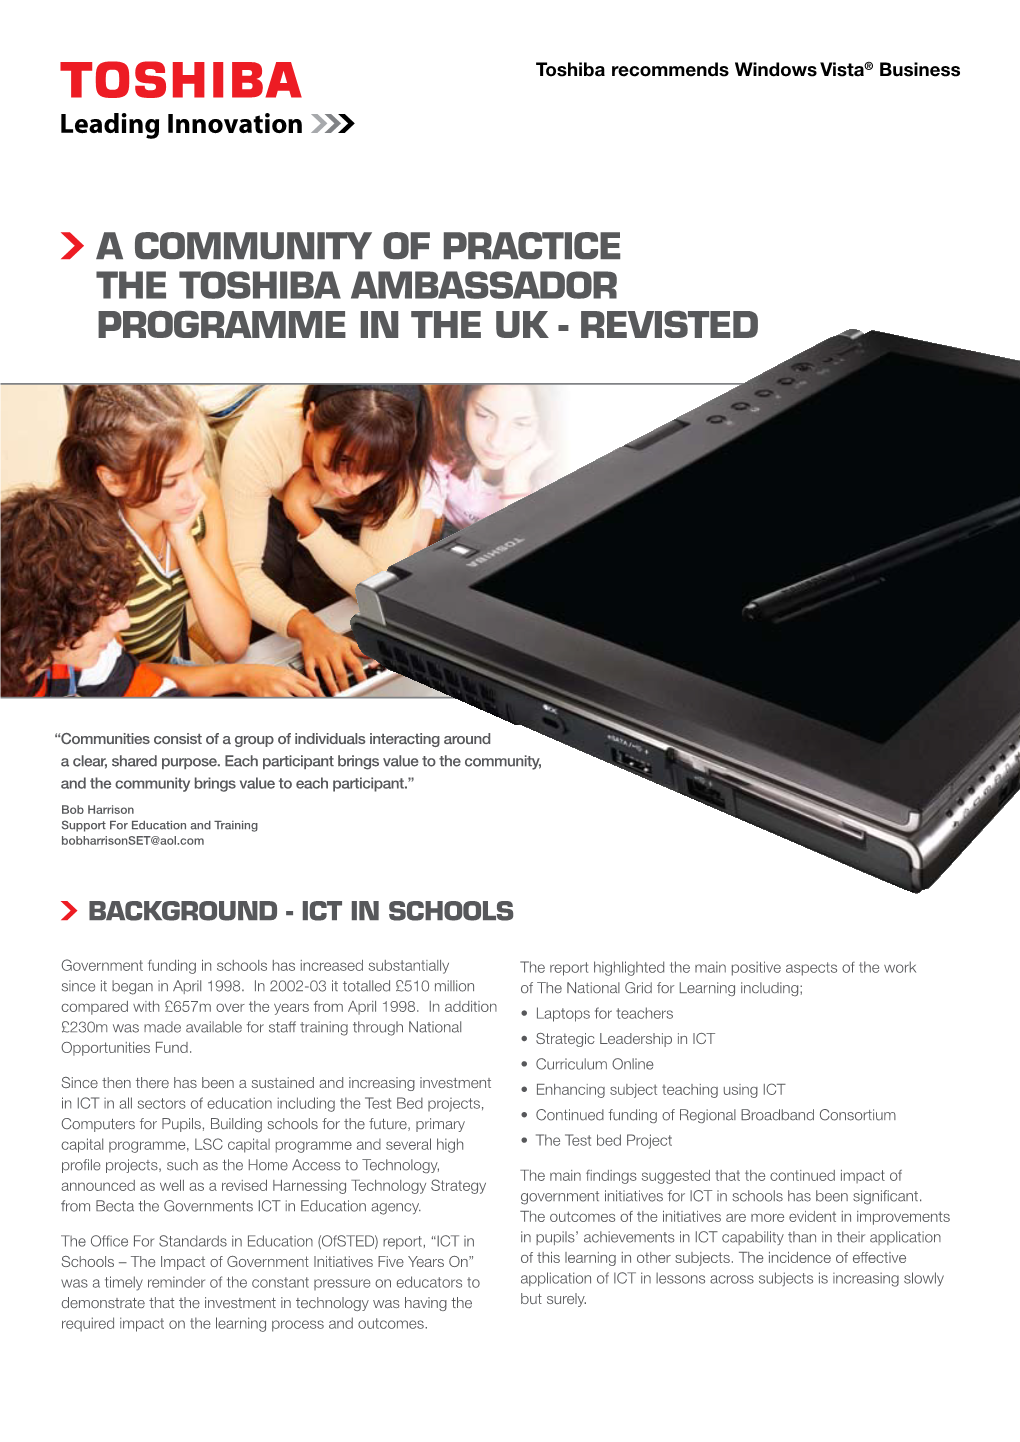 A Community of Practice the Toshiba Ambassador Programme in the UK - Revisted